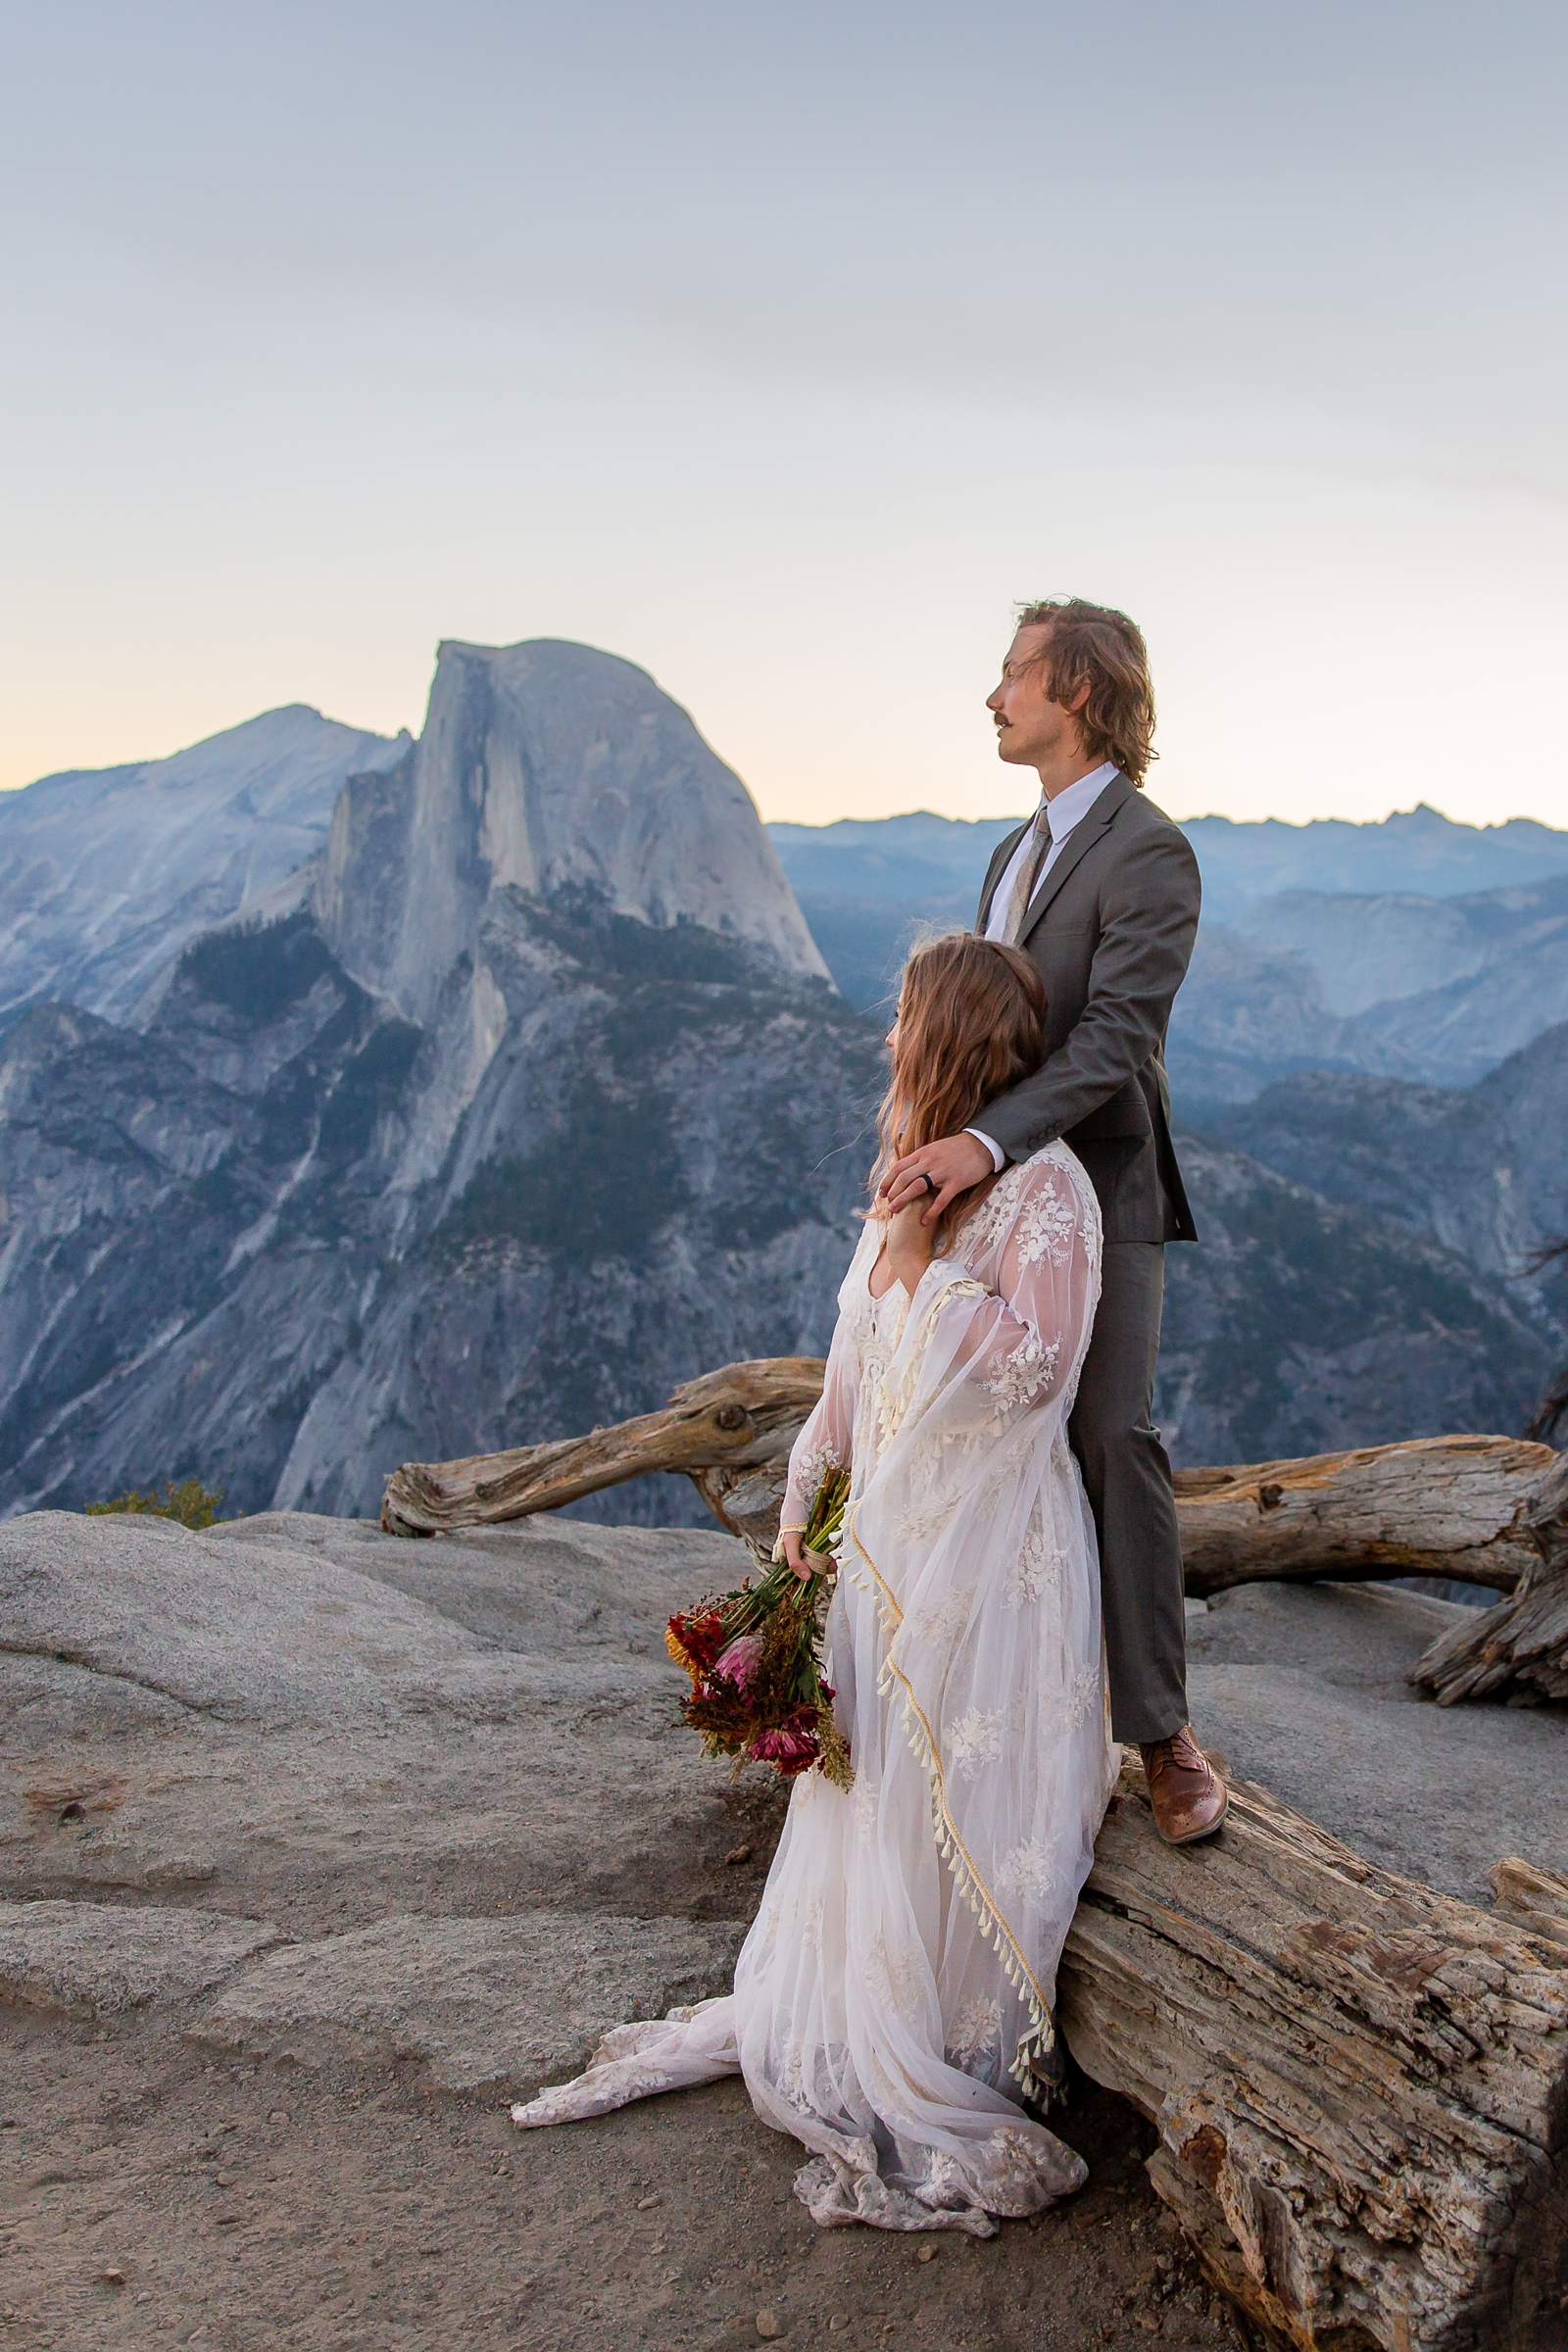 Wistful couple just eloped at Glacier Point in Yosemite.